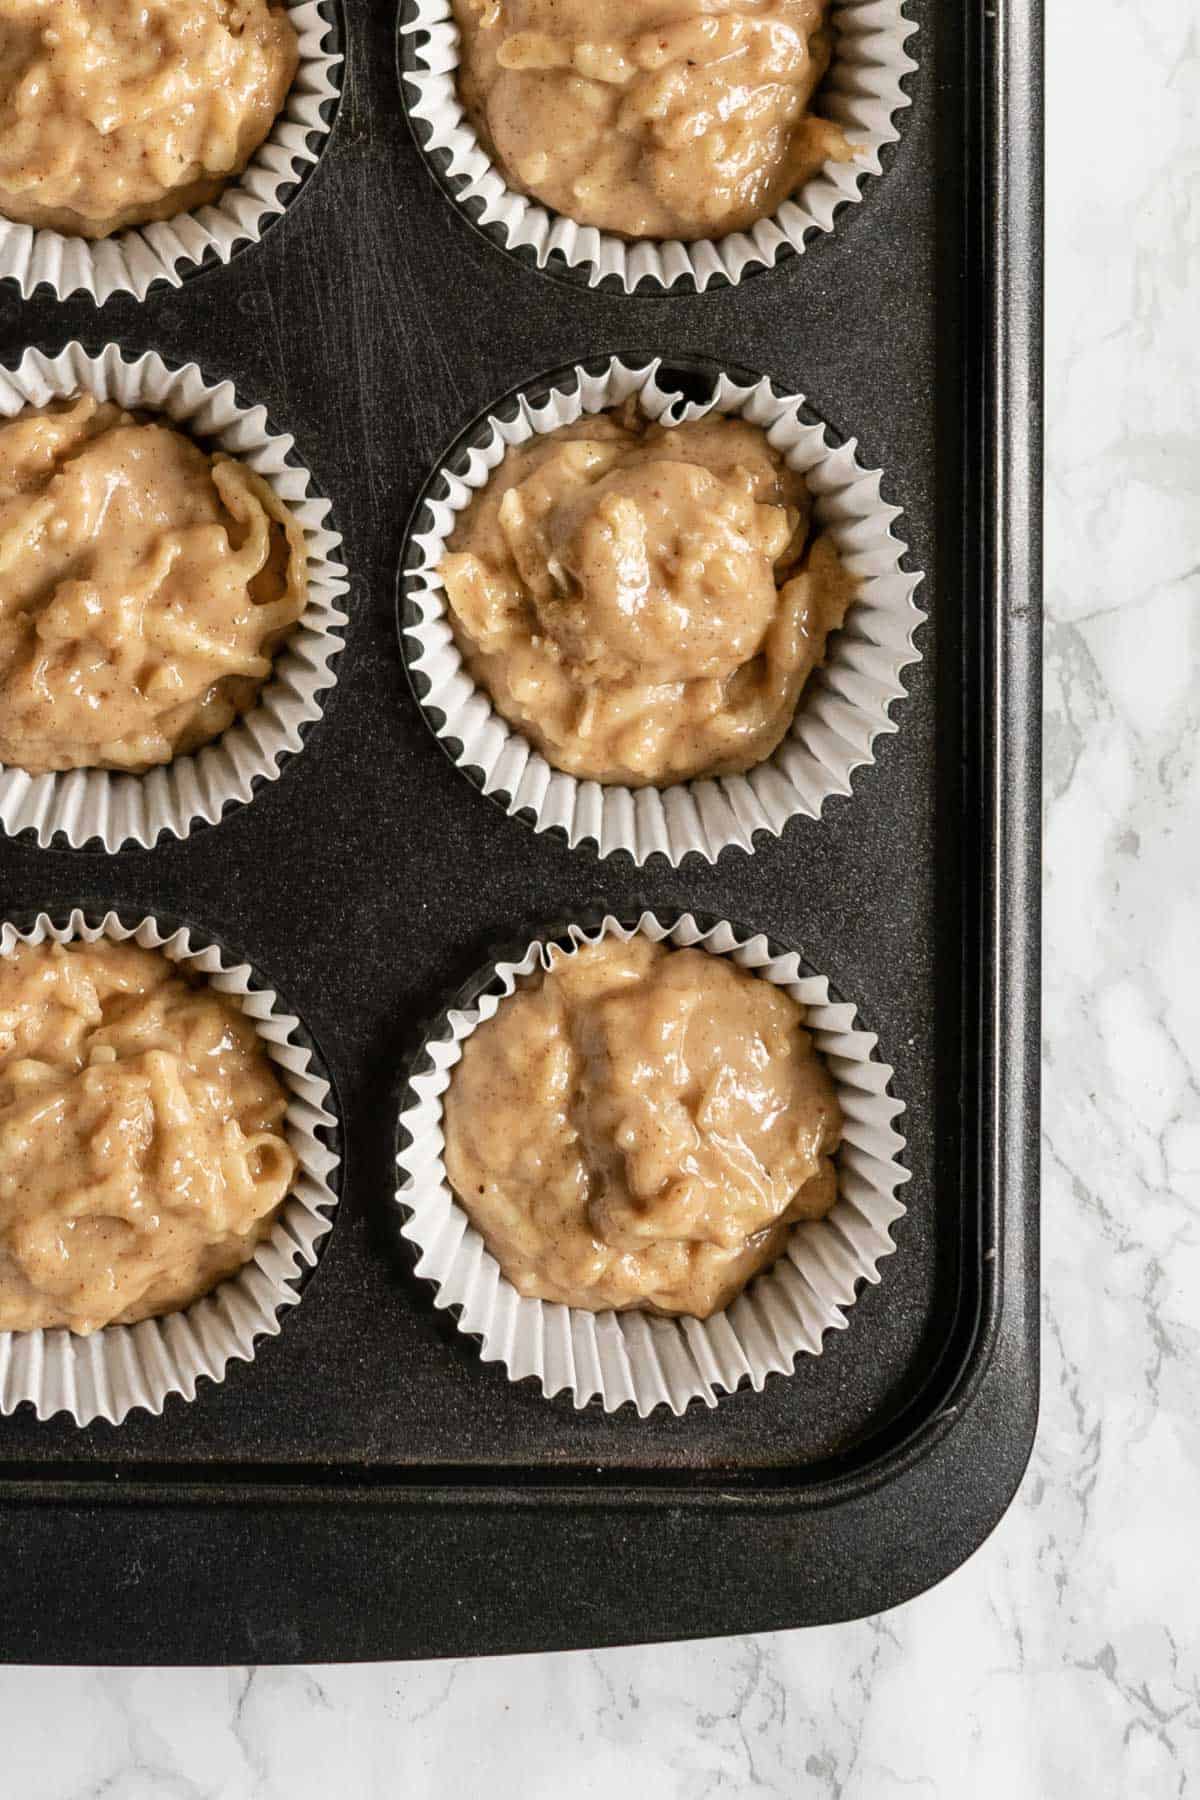 scooped out muffins in a muffin tin